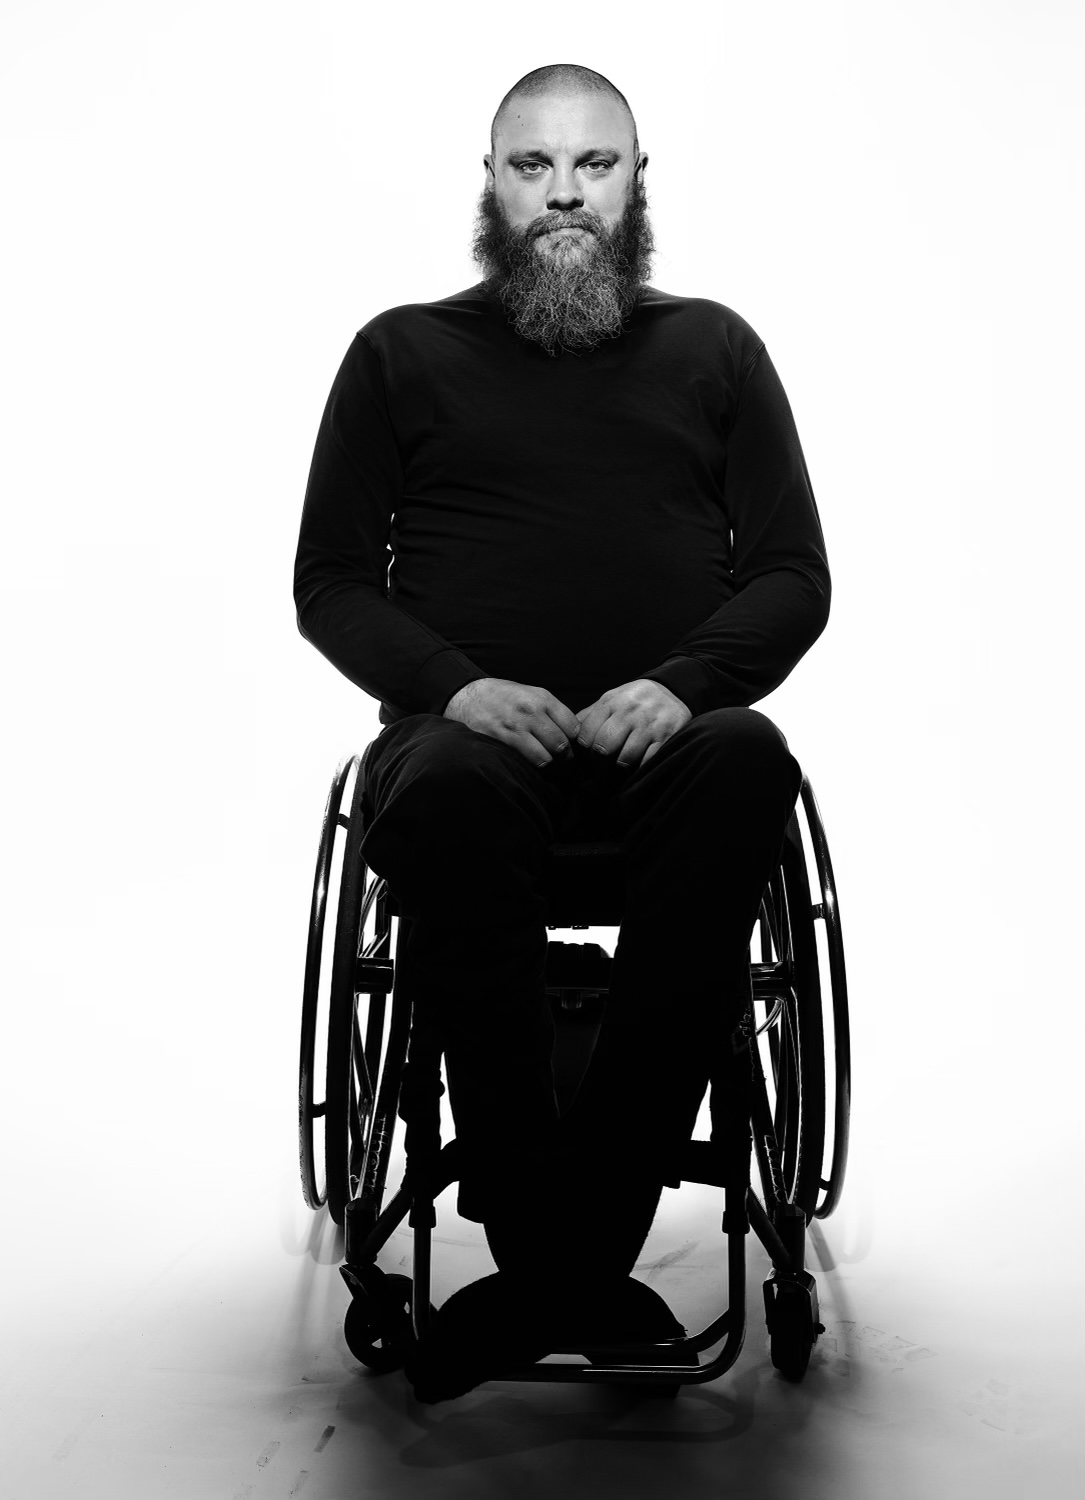 A black-and-white full-length portrait of a bald man with a long beard, dressed in dark clothing, sitting in a wheelchair.